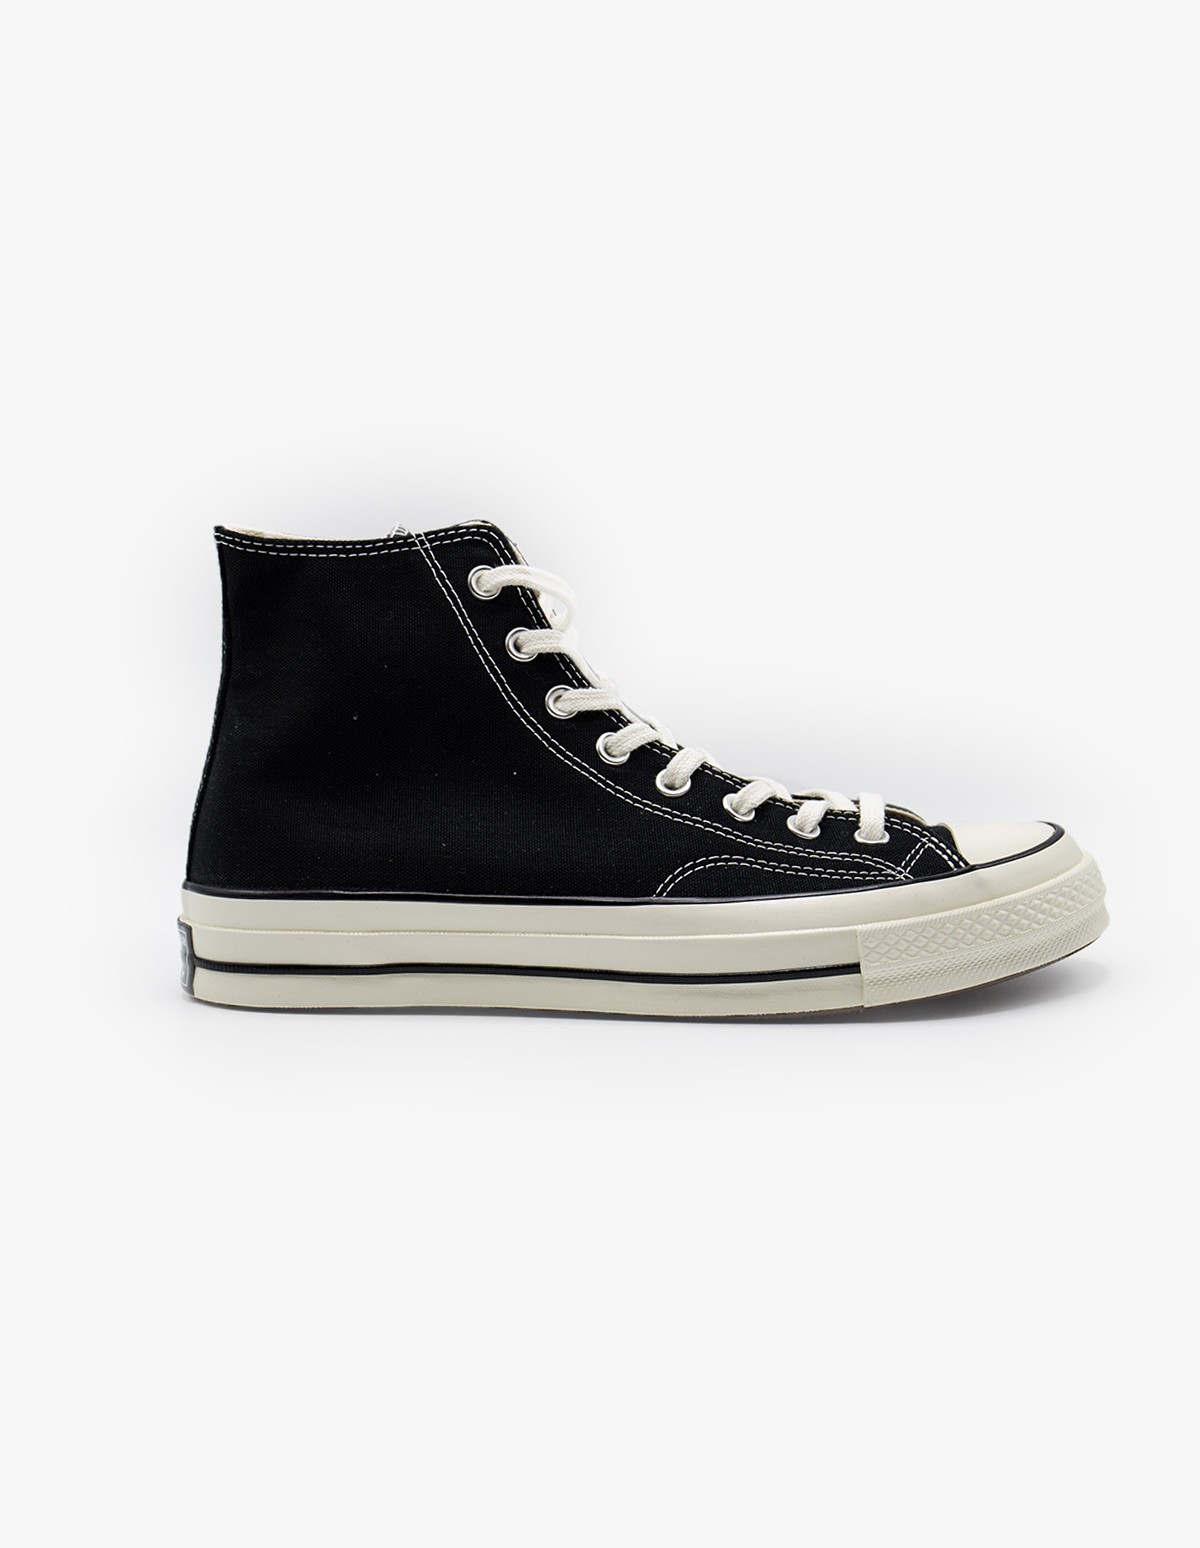 Converse Chuck Taylor High All Star '70 in Black